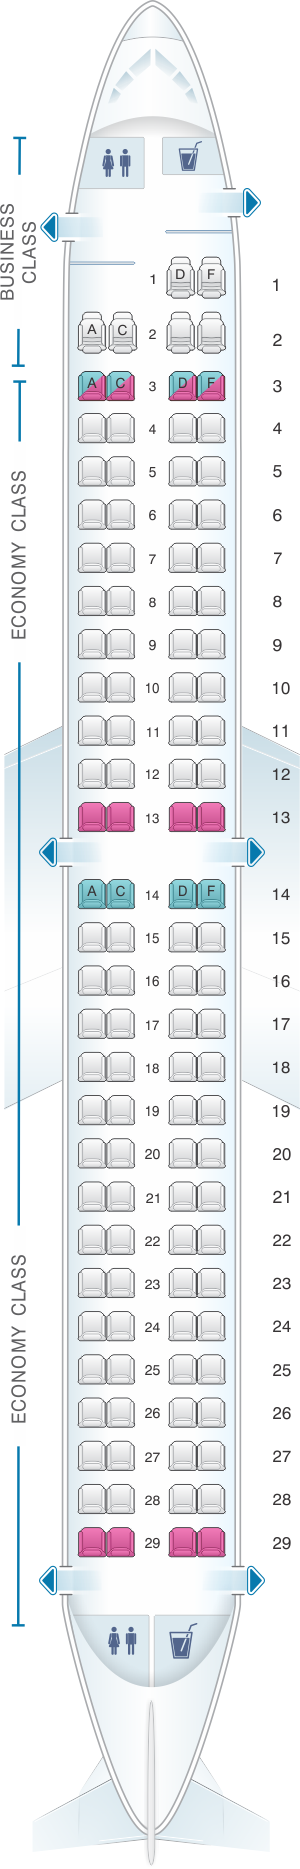 Seat map for Air Moldova Embraer 190